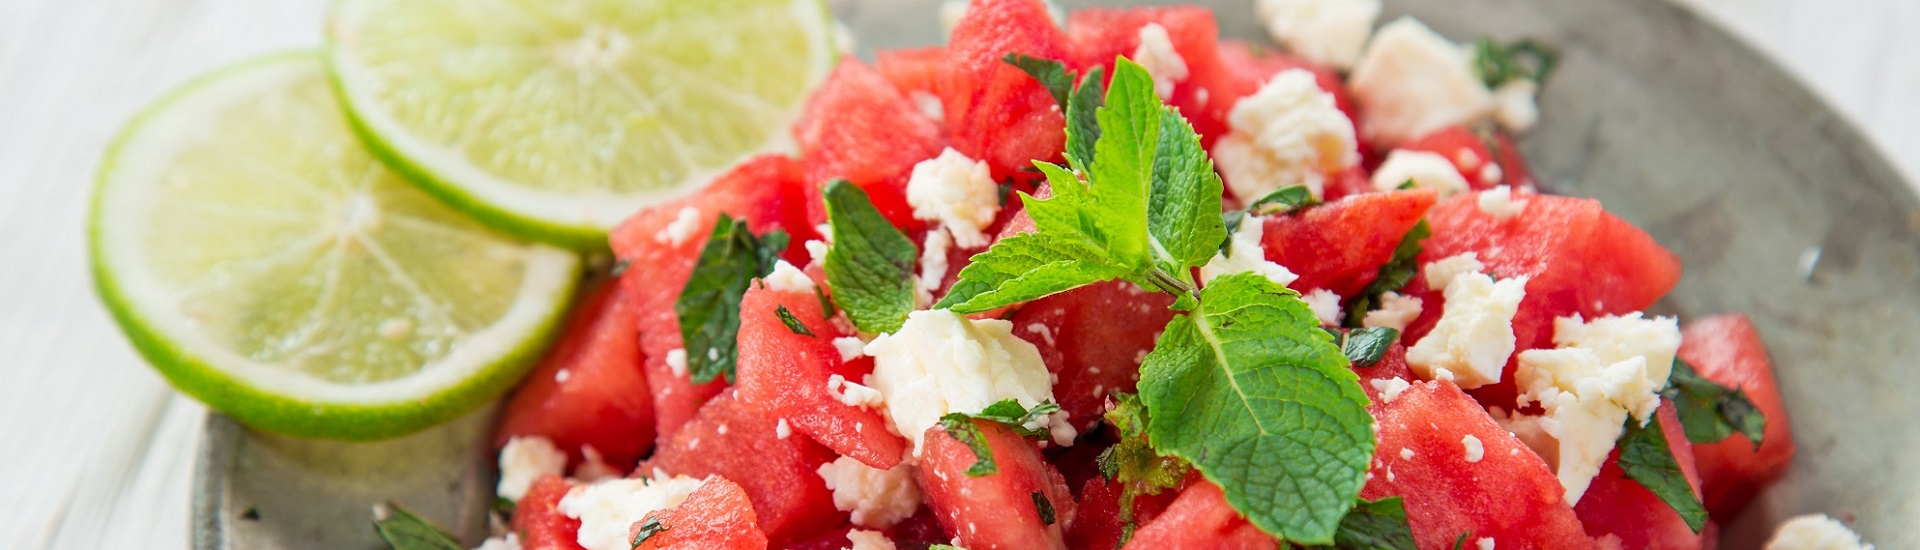 watermelon salad with feta cheese and mint, garnished with lime wheels.